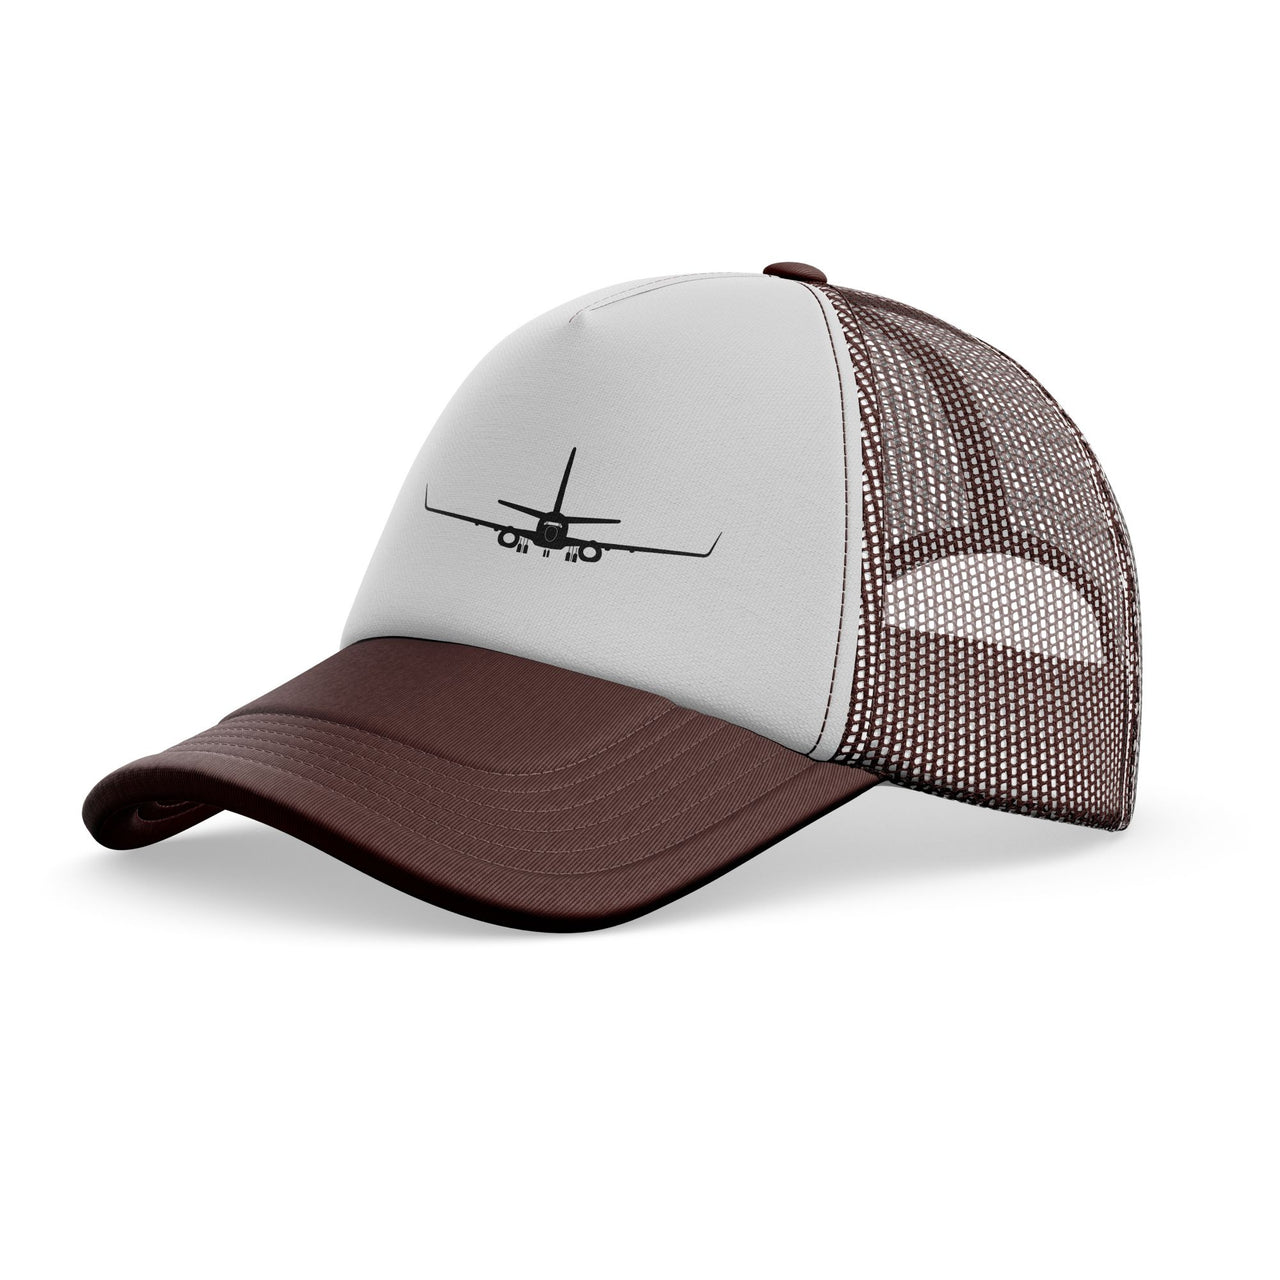 Boeing 737-800NG Silhouette Designed Trucker Caps & Hats